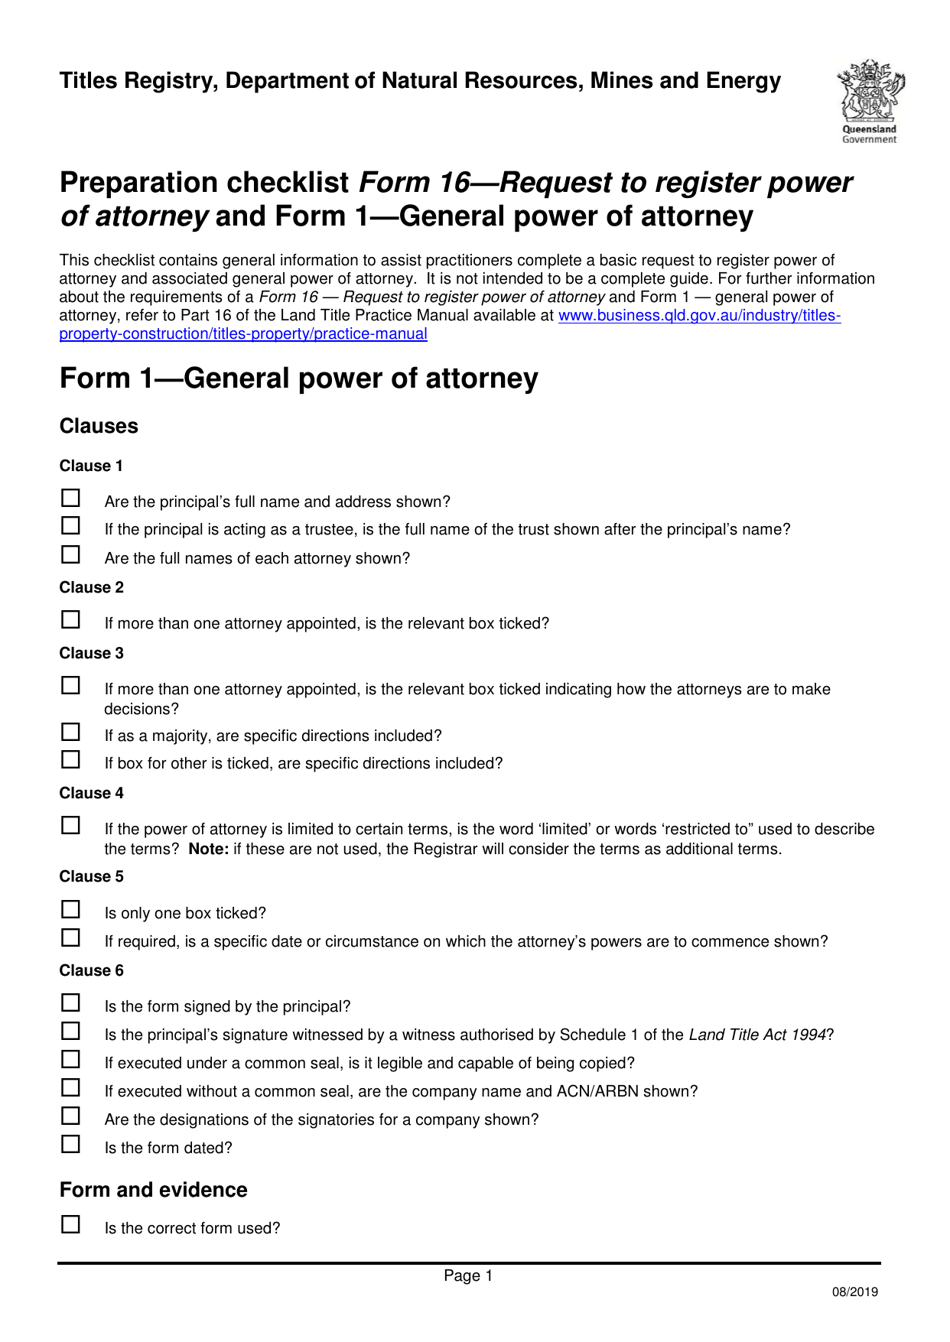 Form 16 (1) Preparation Checklist - Request to Register Power of Attorney and General Power of Attorney - Queensland, Australia, Page 1